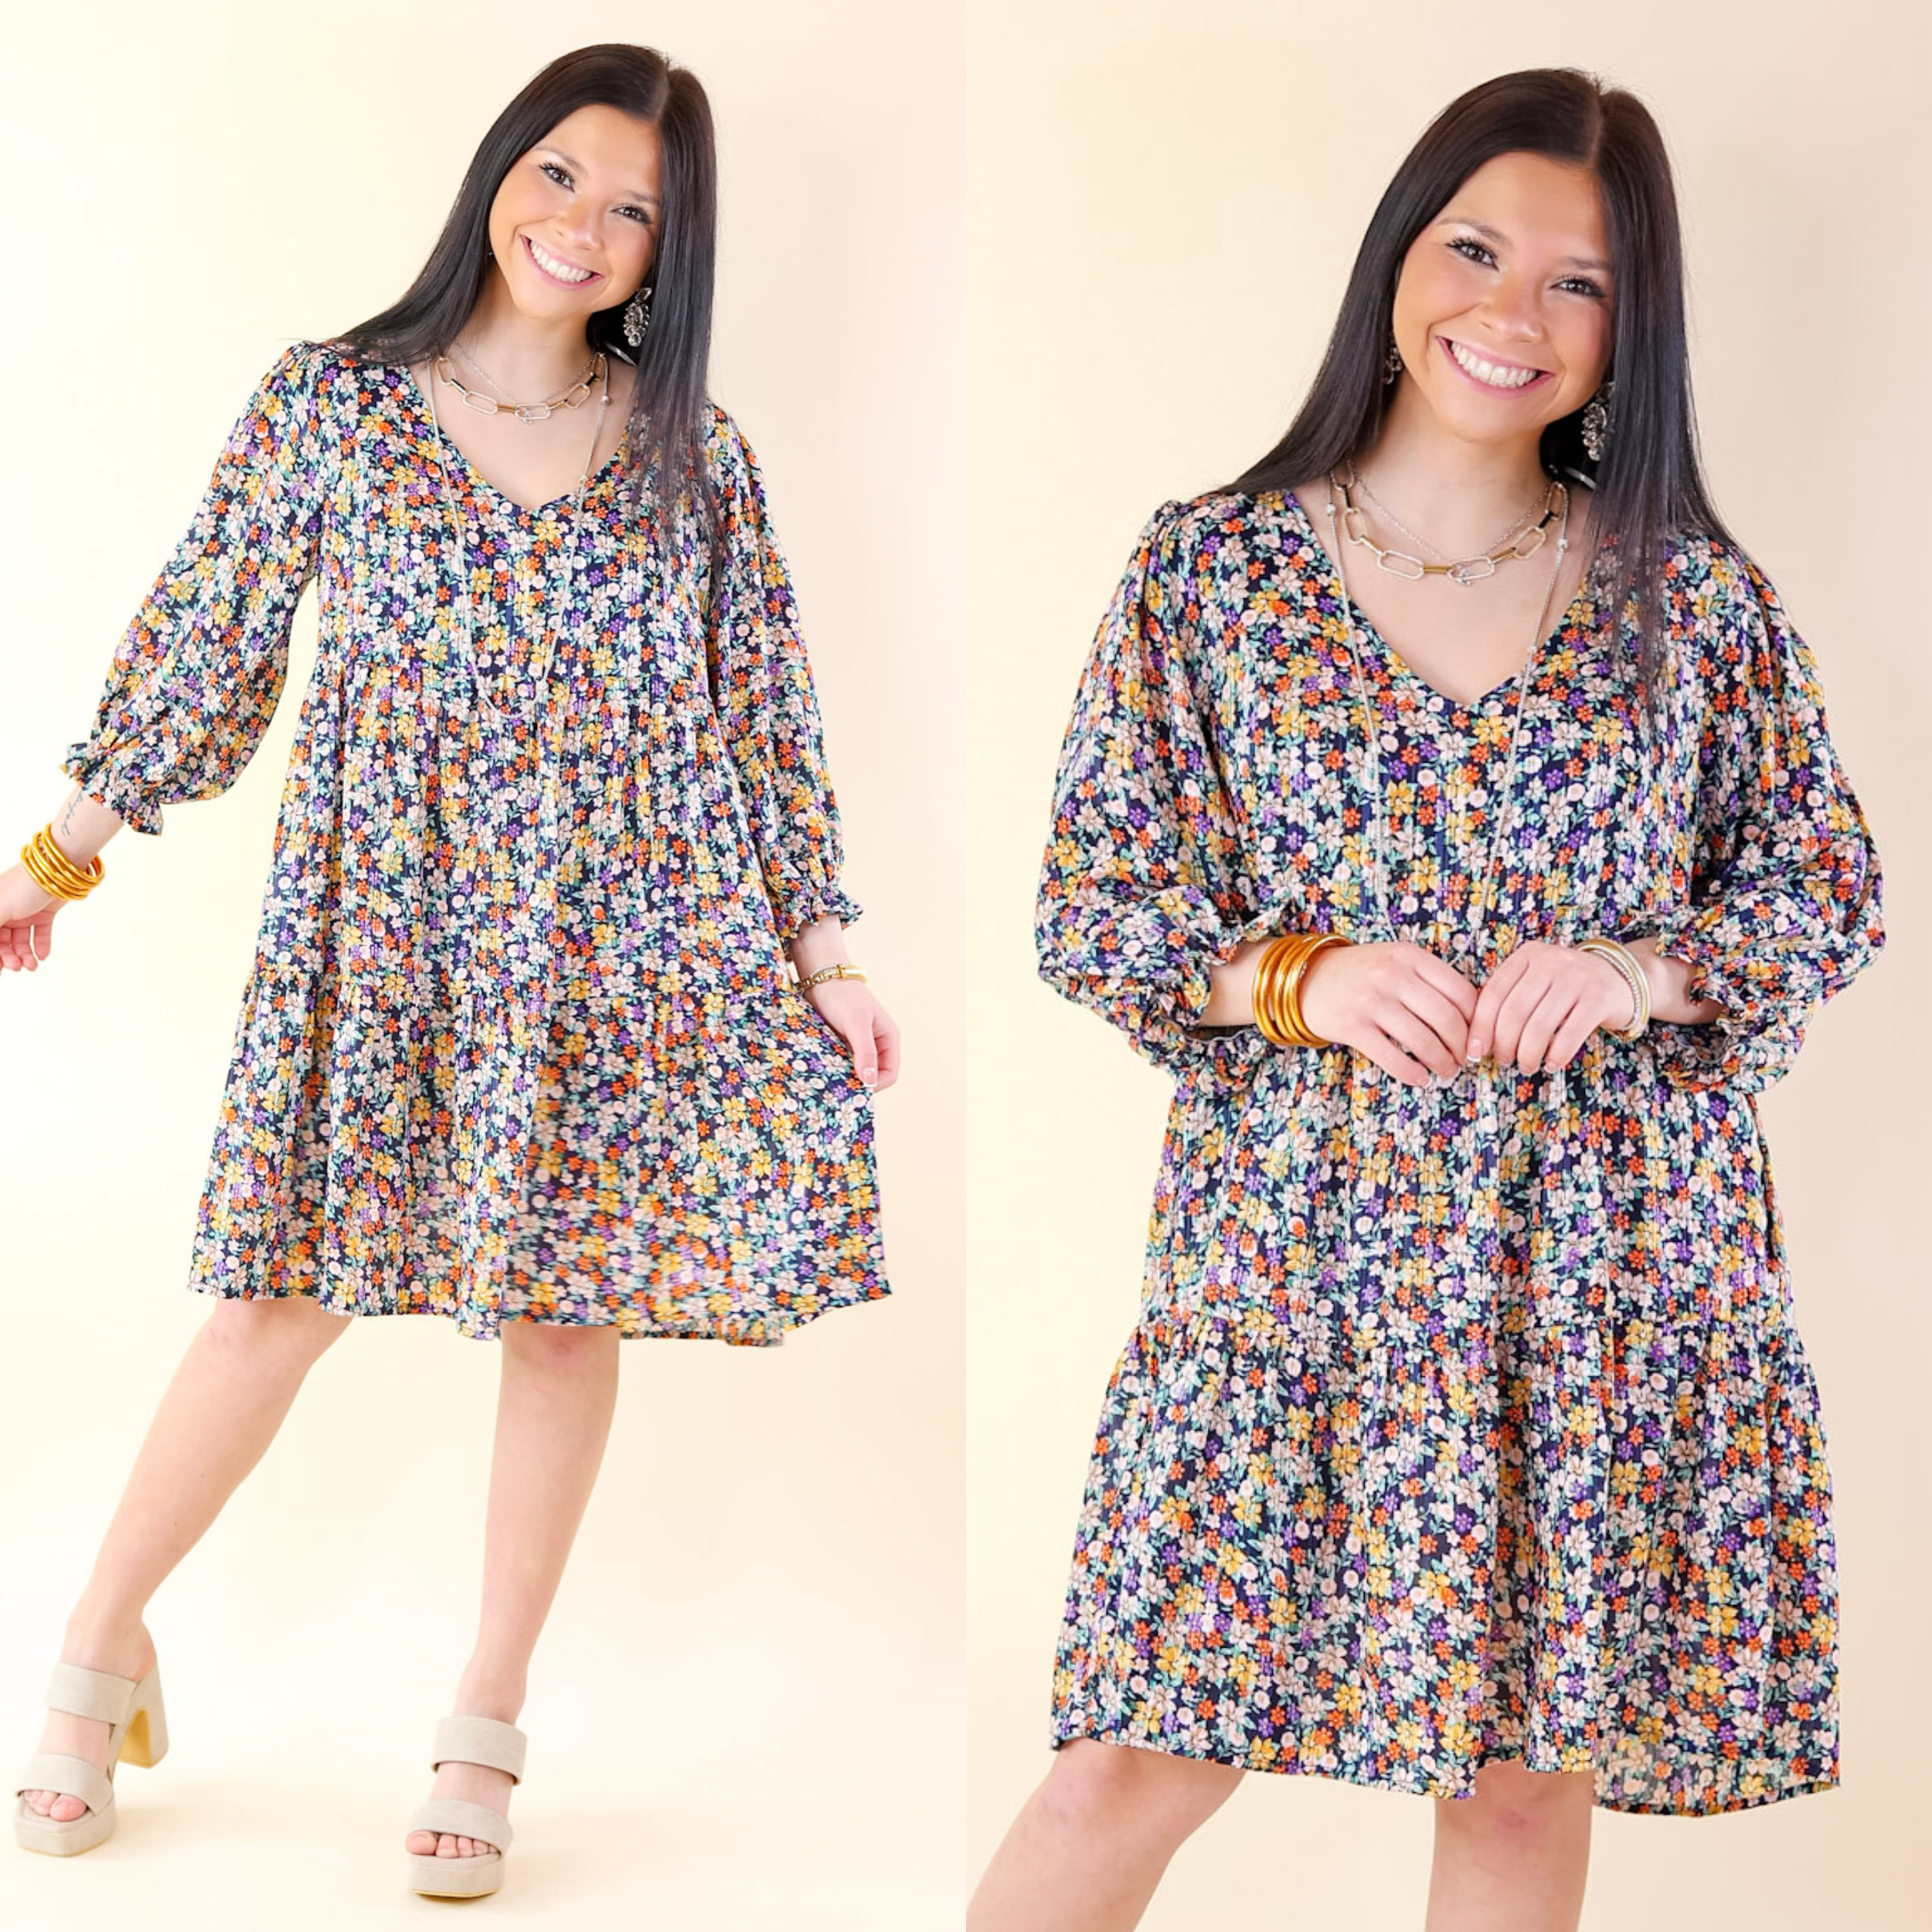 Pretty Personality Tiered Floral Dress in Navy Blue - Giddy Up Glamour Boutique